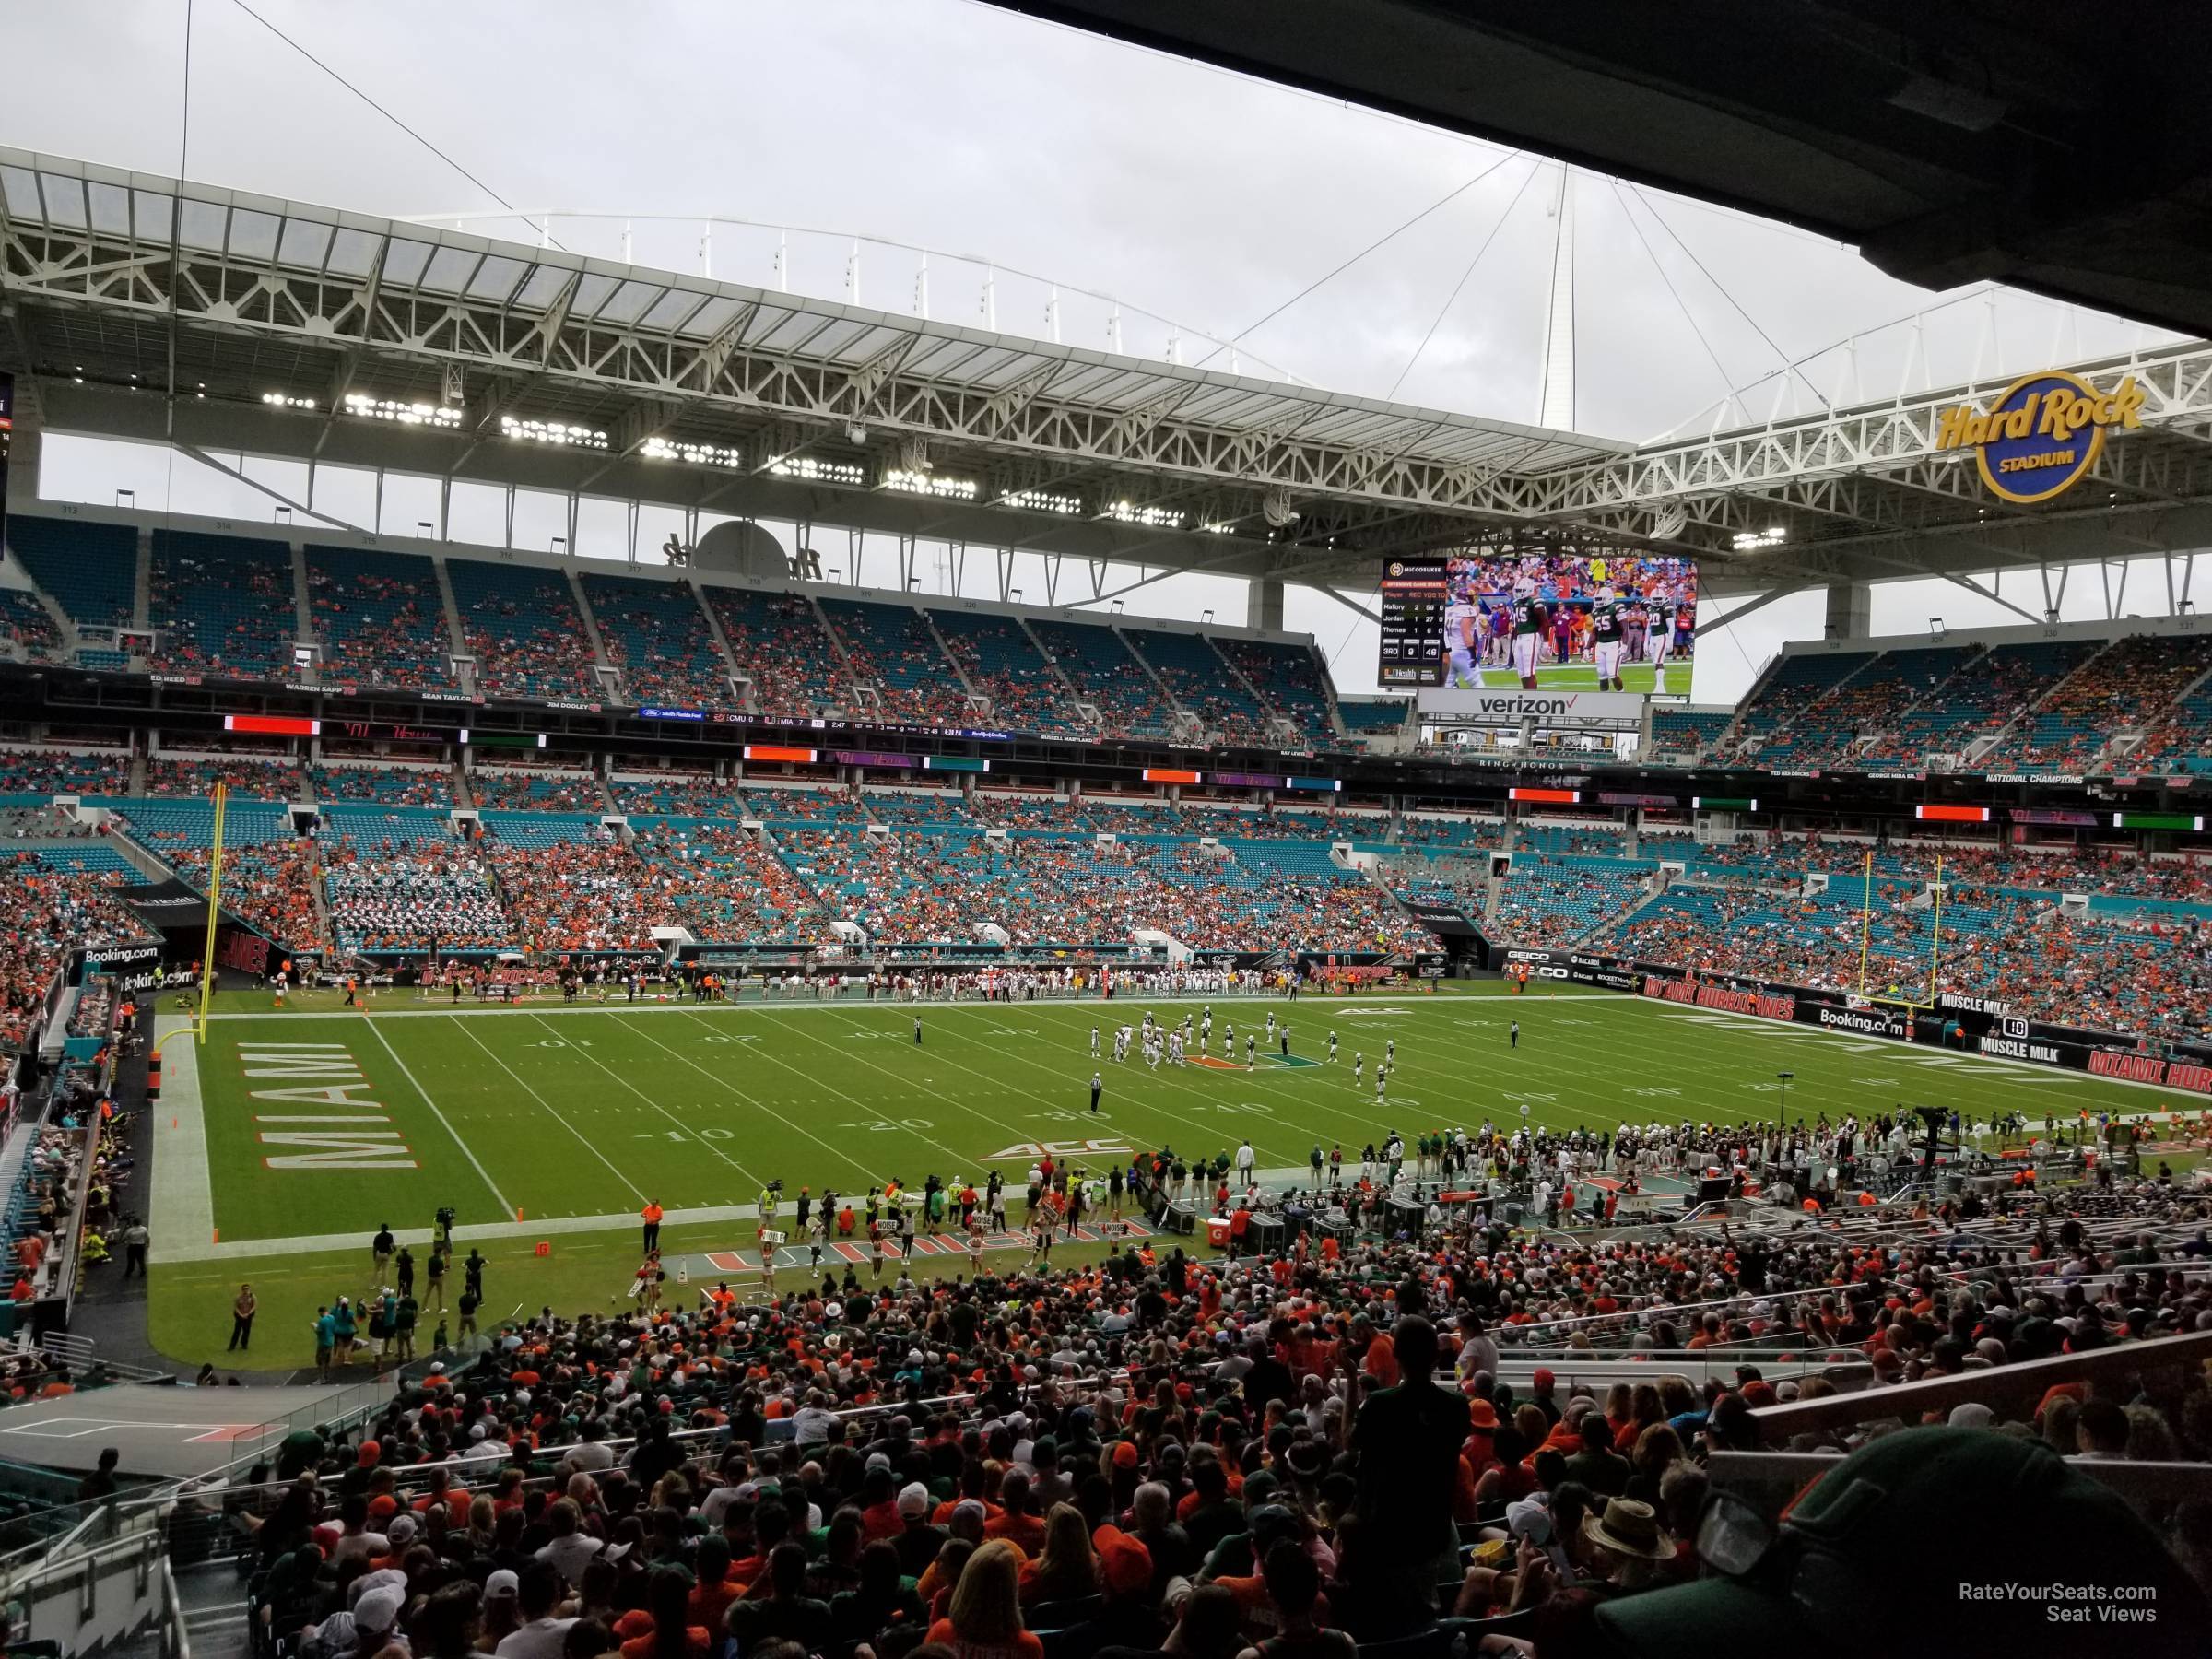 section 251, row 18 seat view  for football - hard rock stadium